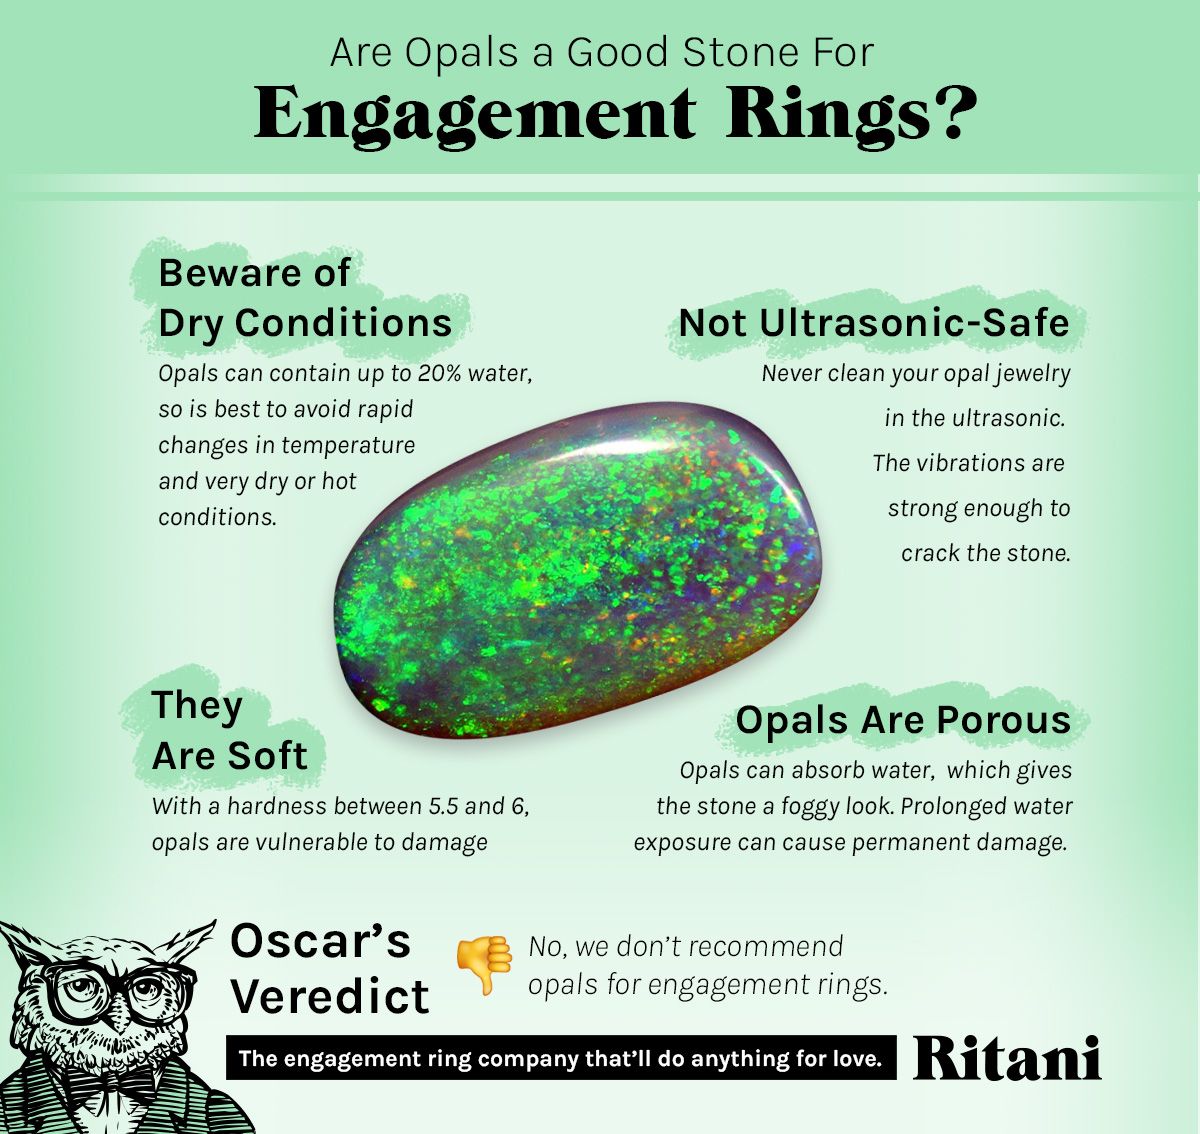 Are Opal Engagement Rings a Good Idea?